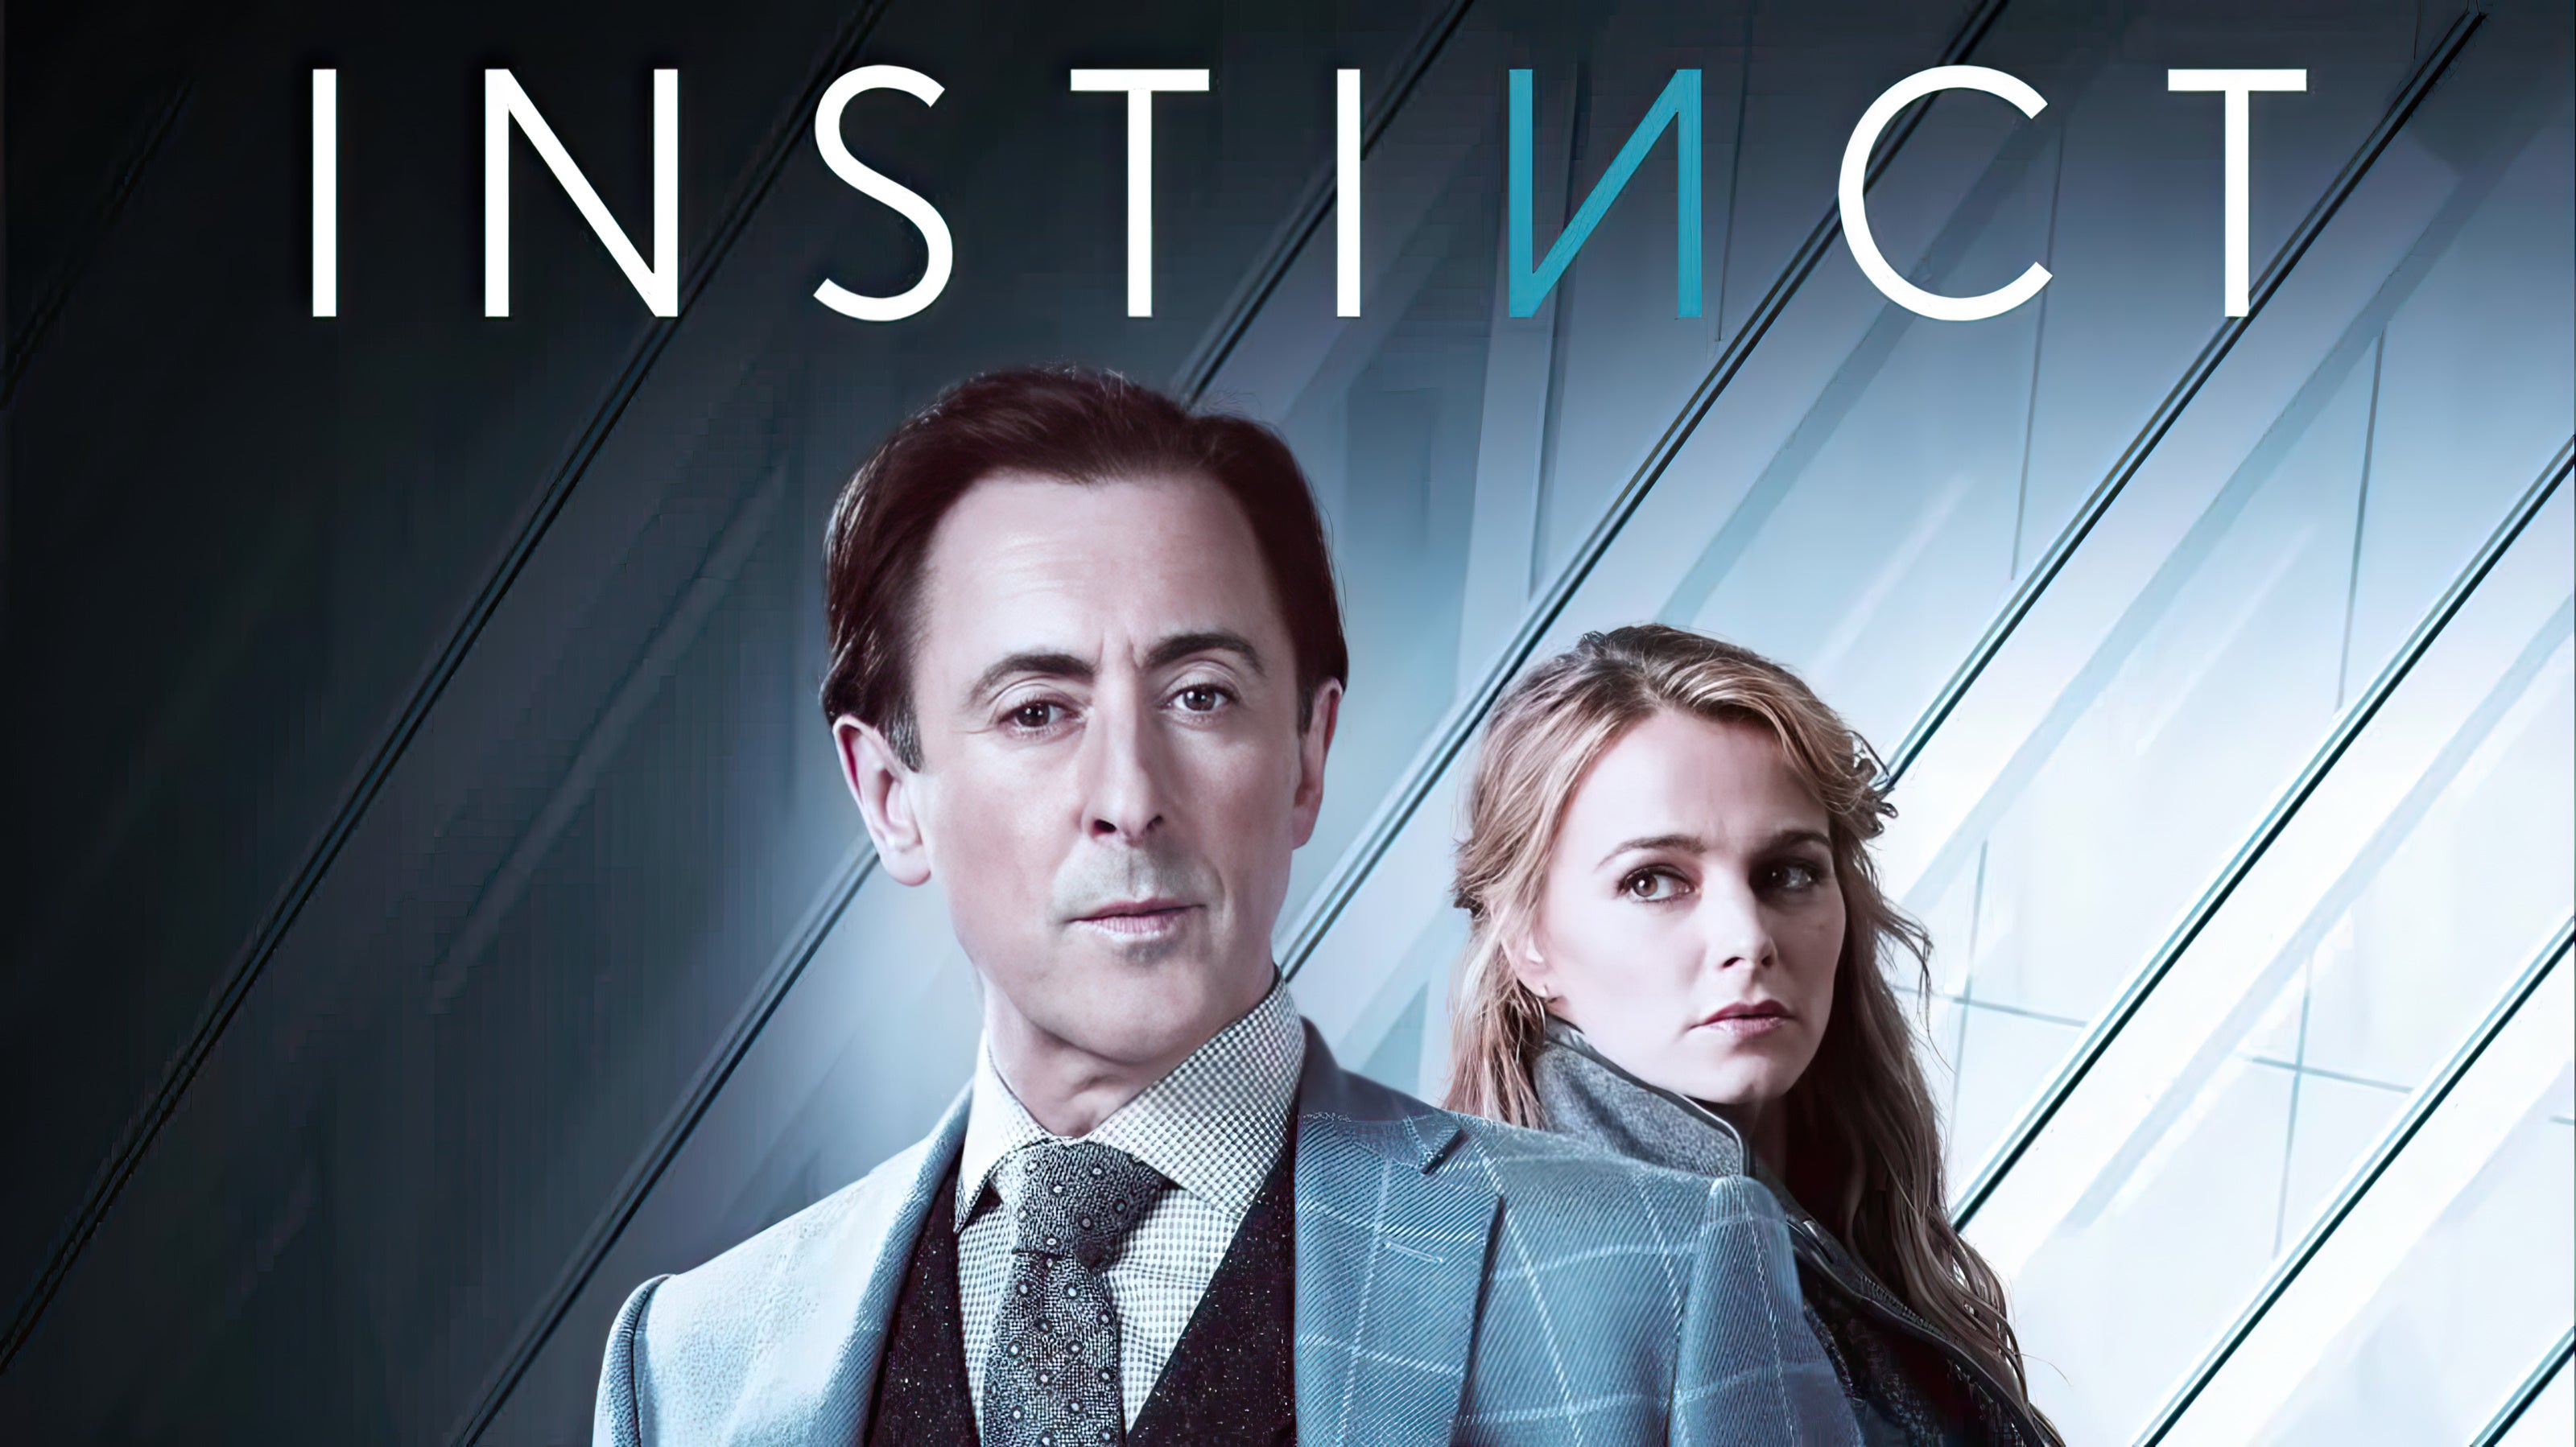 Instinct TV Series Script Screenplay - Image of Television Poster